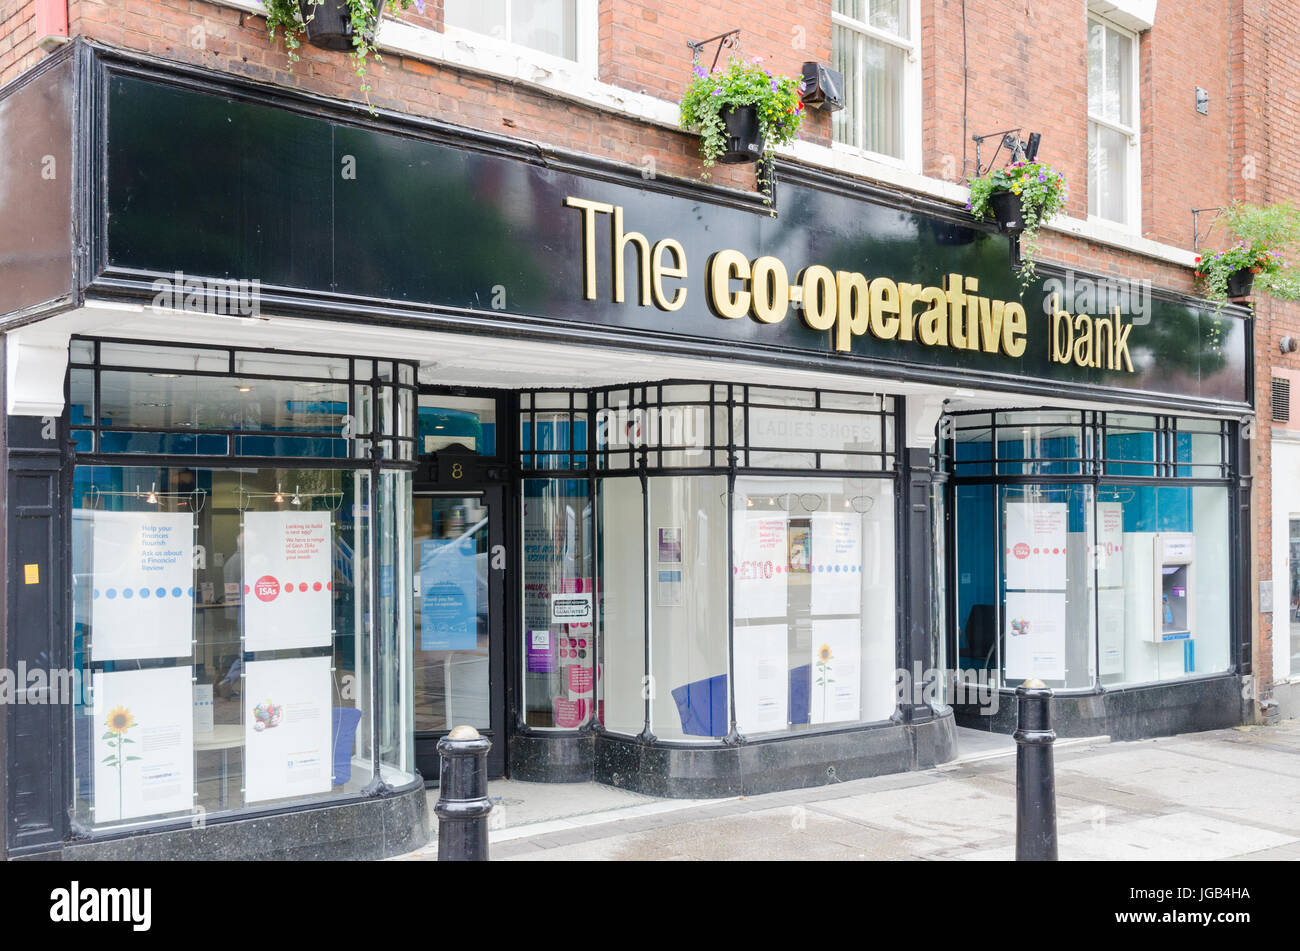 Branch of The Co-operative Bank in Colehill, Tamworth, Staffordshire Stock Photo